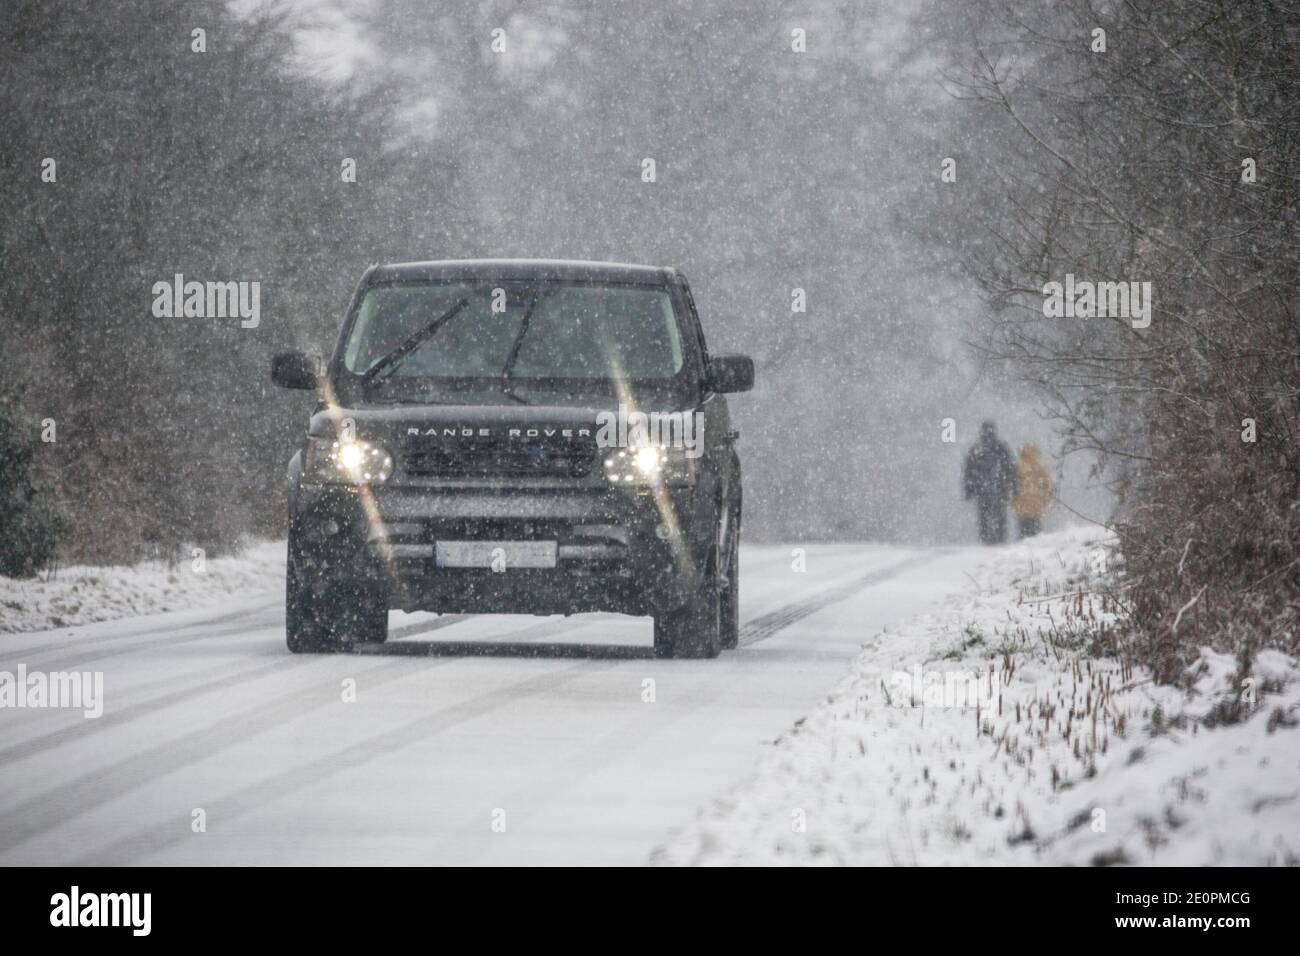 Kidderminster, UK. 2nd January, 2021. UK weather: with daytime temperatures failing to rise much above freezing across Worcestshire and roads already icy, Kidderminster is hit with heavy morning snow showers making driving conditions hazardous for all motorists. Credit: Lee Hudson/Alamy Live News Stock Photo